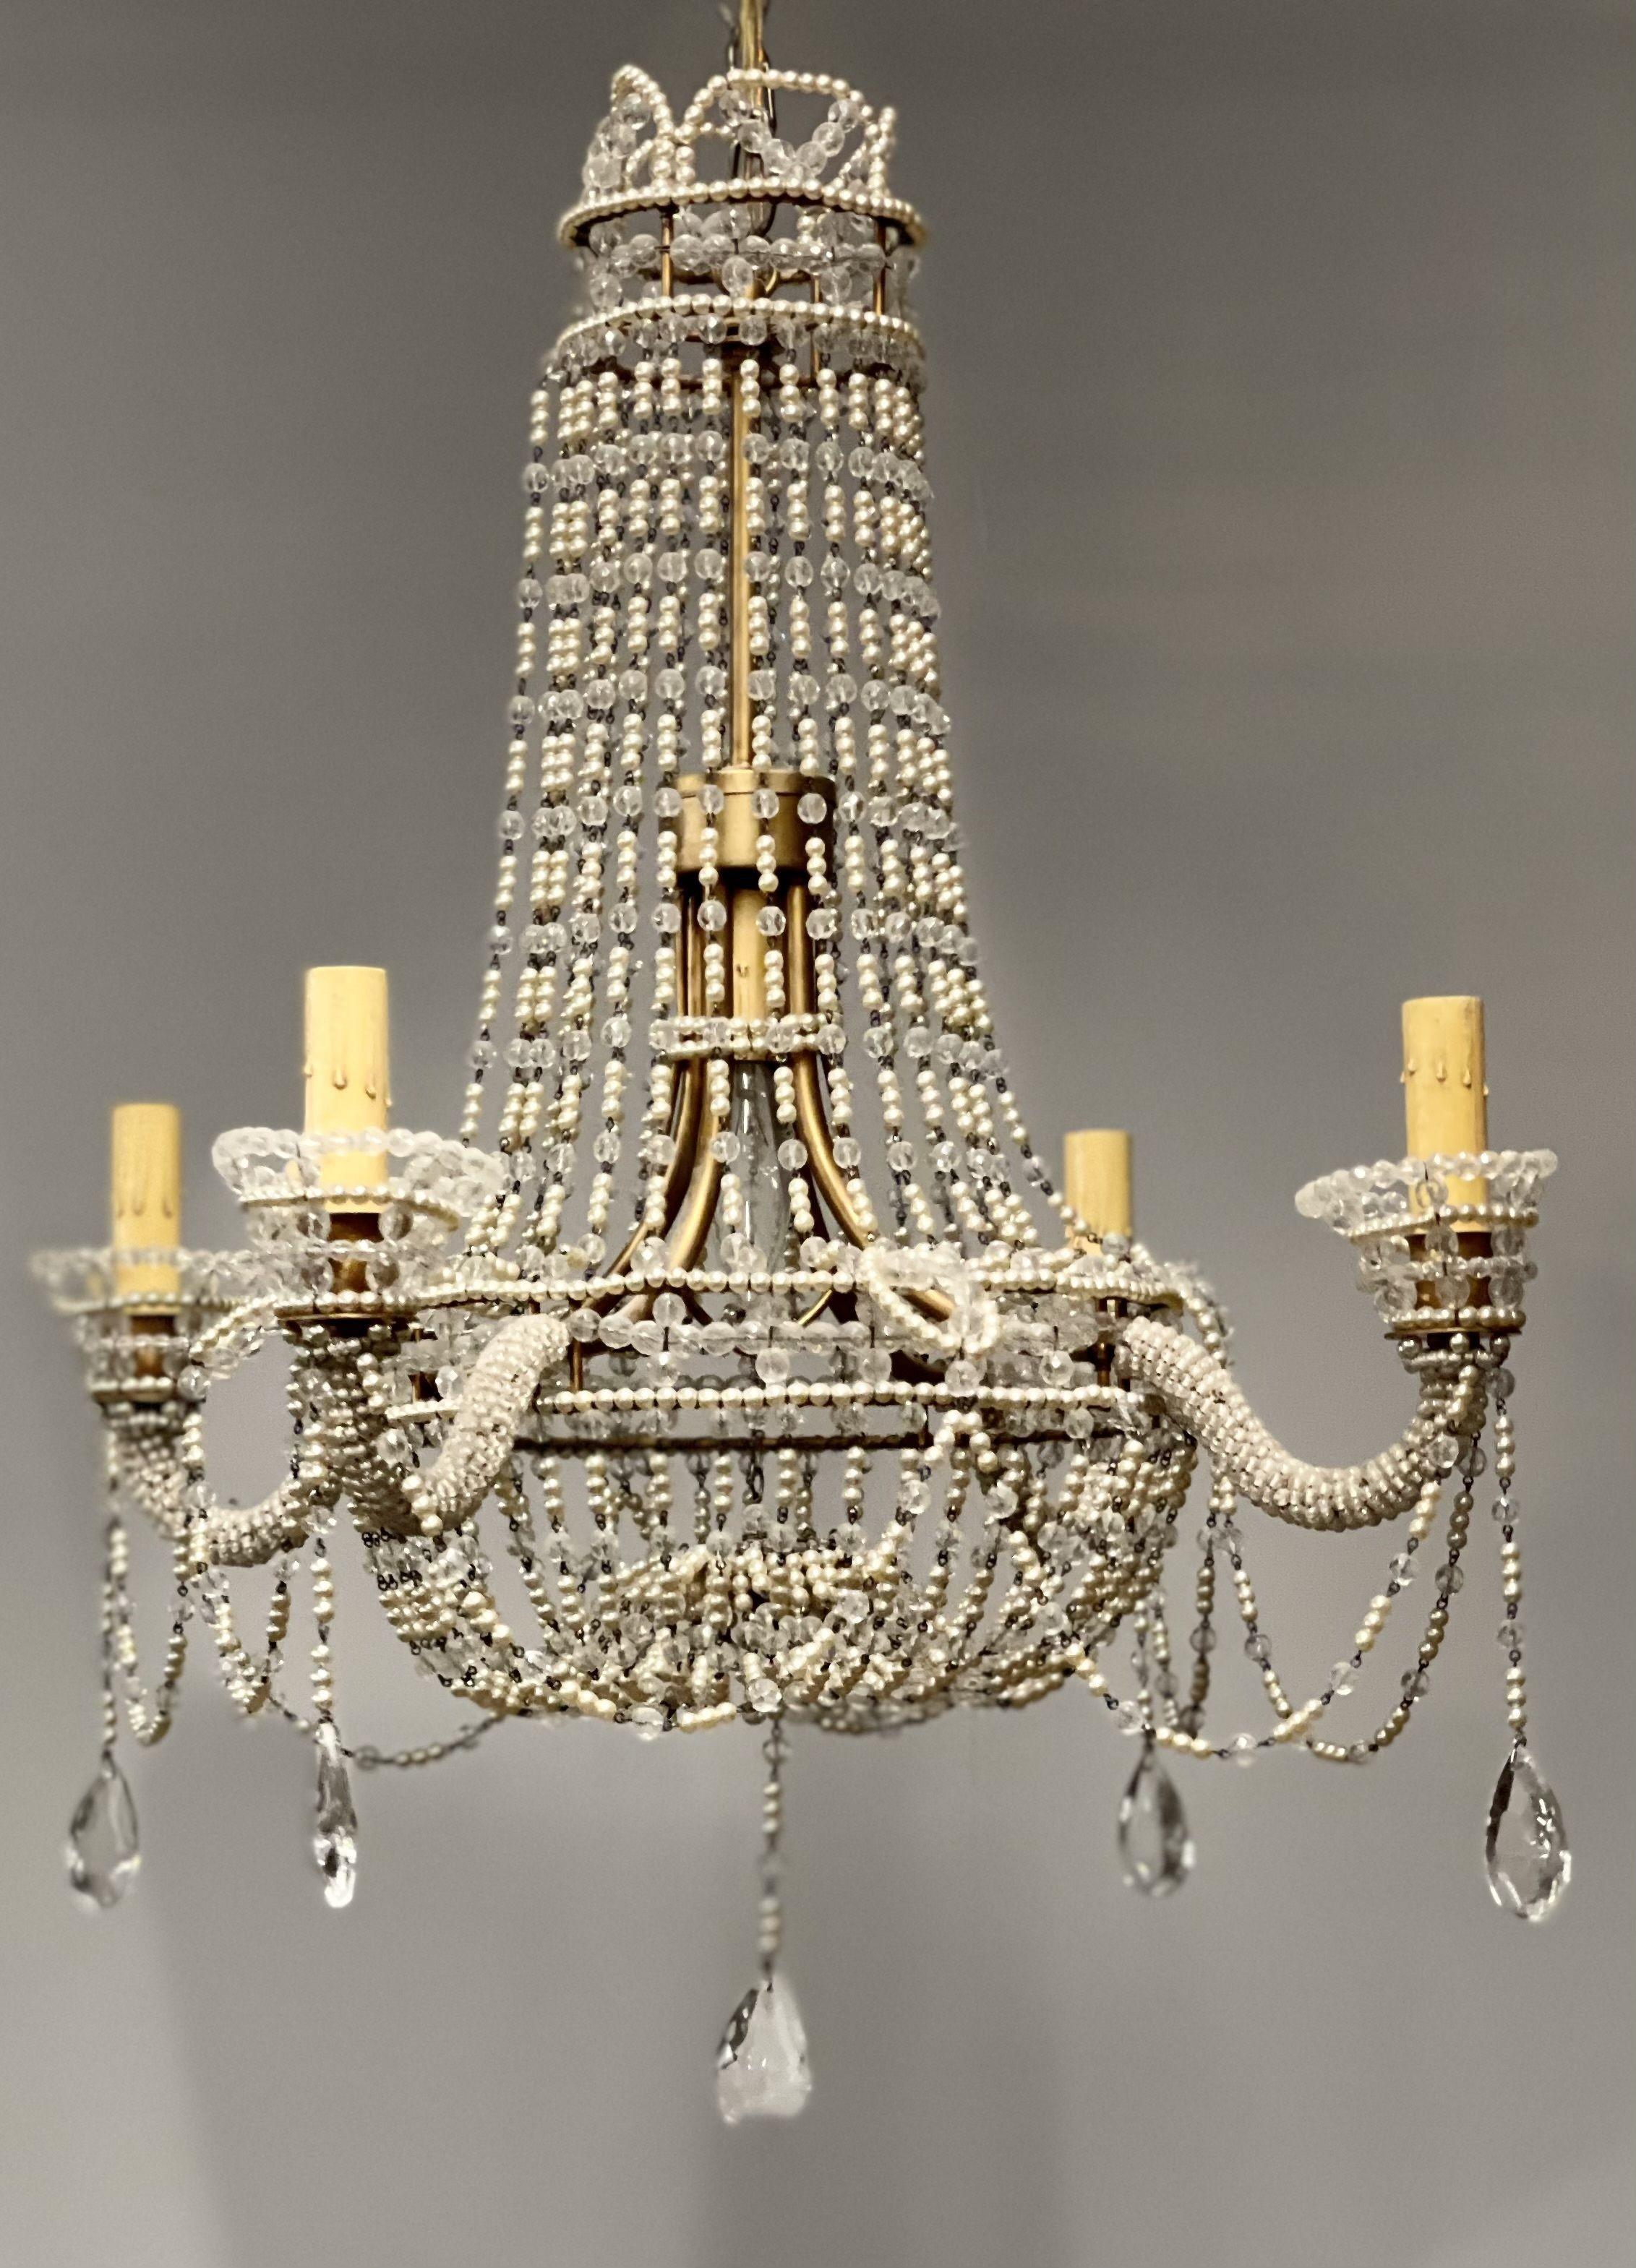 Basket Weave French Crystal Pearl Beaded Chandelier. A fine French Chandelier having five lights with intertwining pearal and crystal decorations.  32H x 20 dia Removed directly from Dr Shawn Garber's home on the Gold Coast of Long Island. Part of